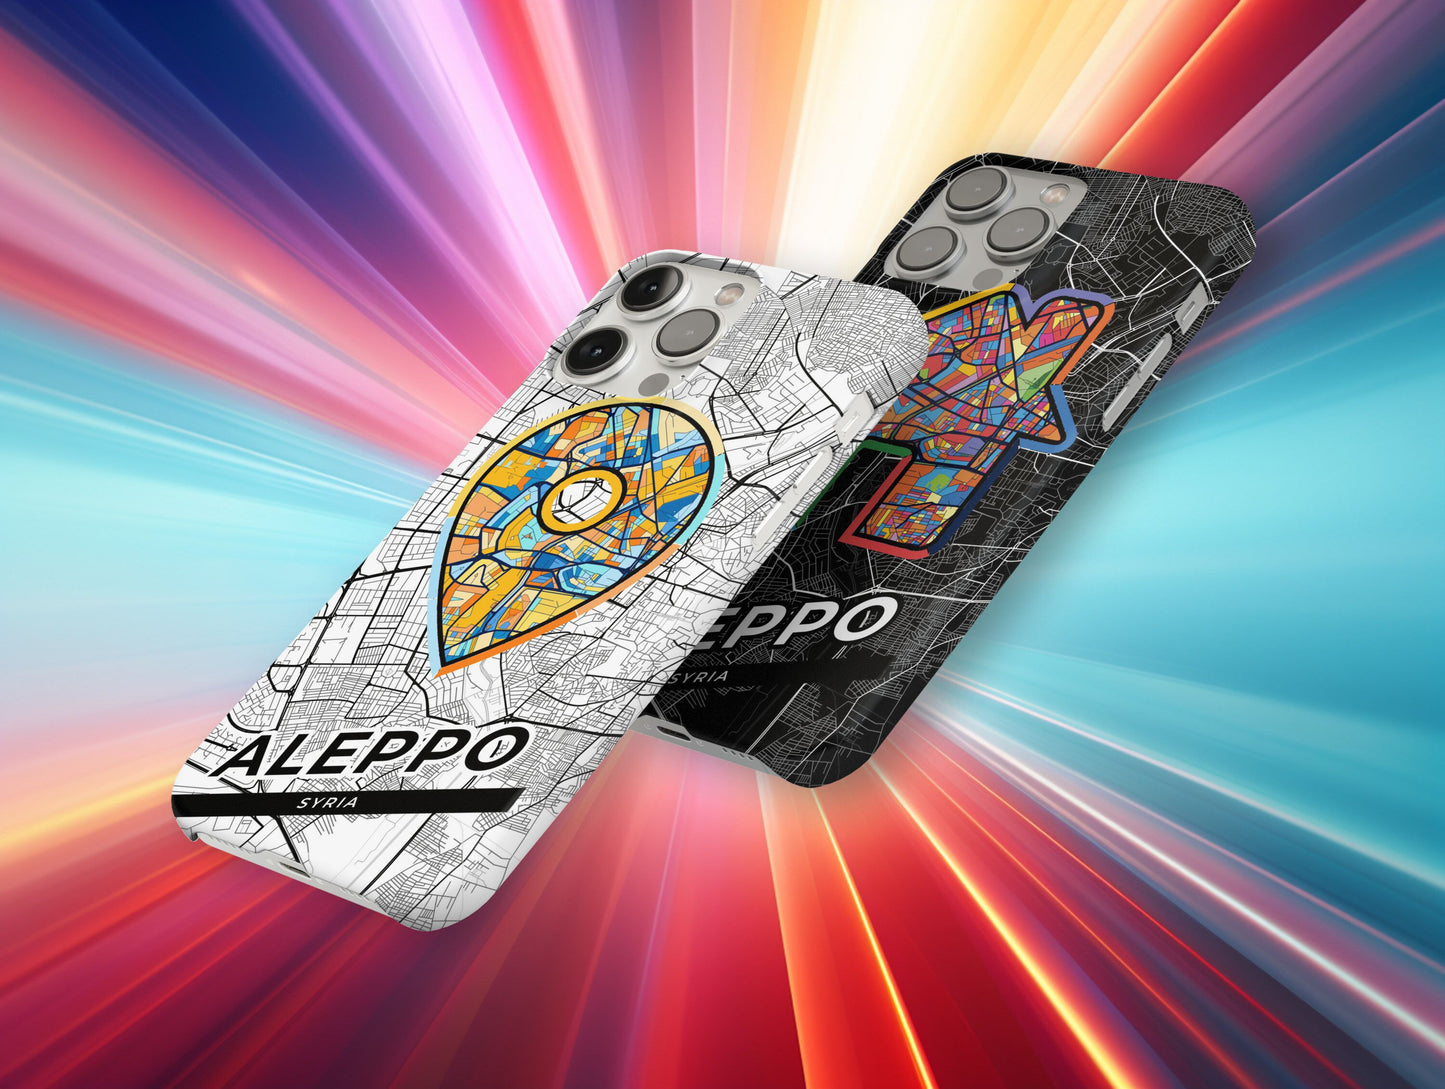 Aleppo Syria slim phone case with colorful icon. Birthday, wedding or housewarming gift. Couple match cases.